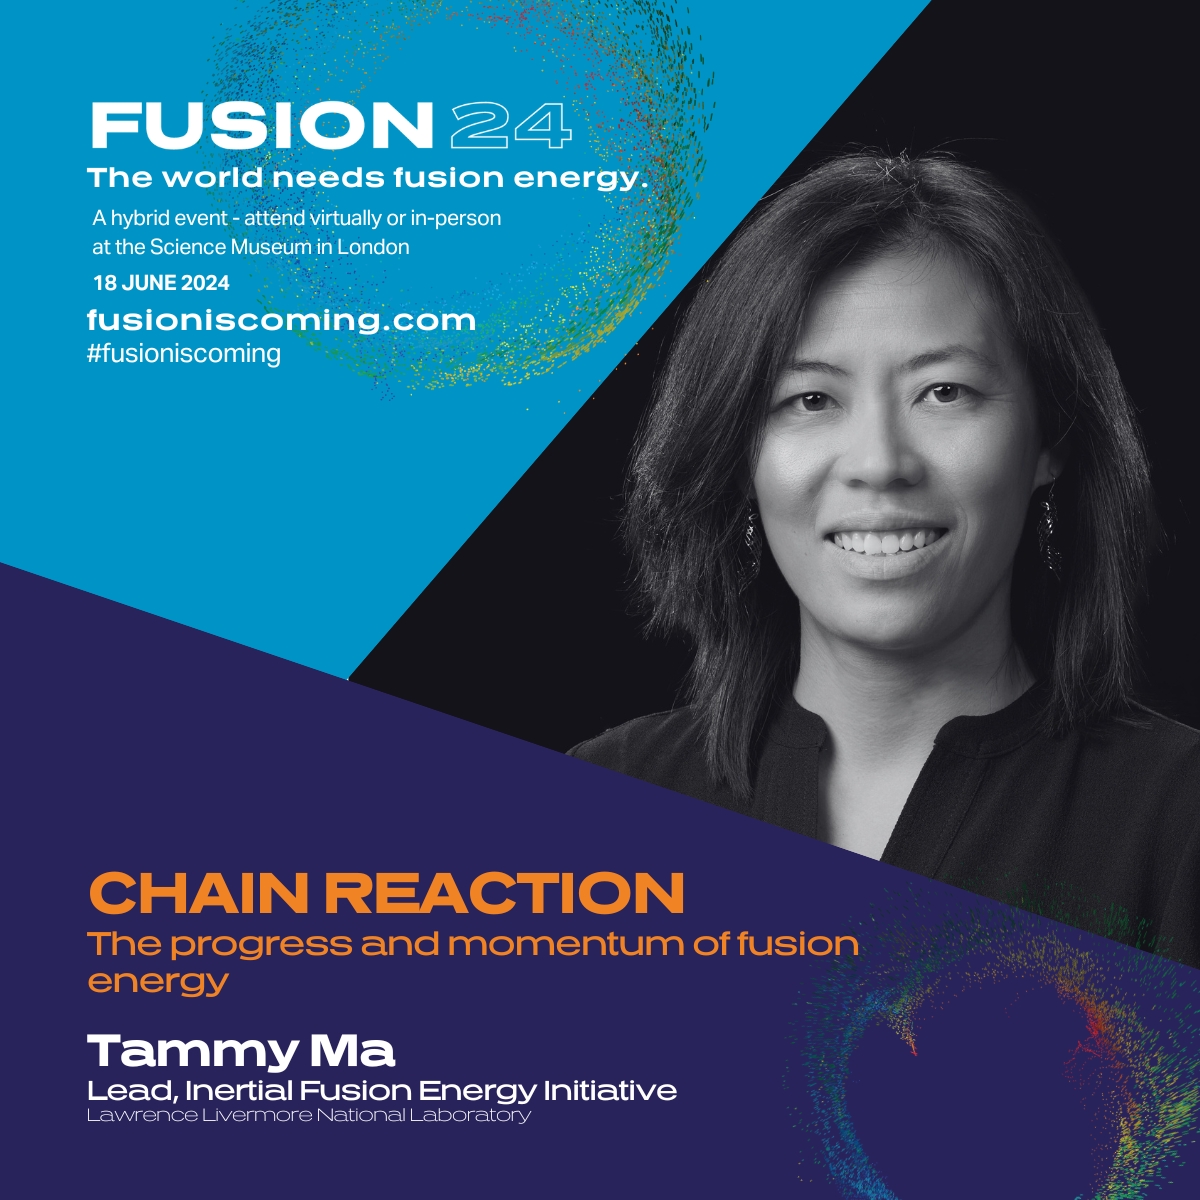 As part of CHAIN REACTION: The progress and momentum of fusion energy... Dr. Tammy Ma, lead for the Inertial Fusion Energy Initiative at NIF (@Livermore_Lab) will be giving us the inside track on achieving the groundbreaking milestone of fusion ignition ➡fusioniscoming.com/speakers